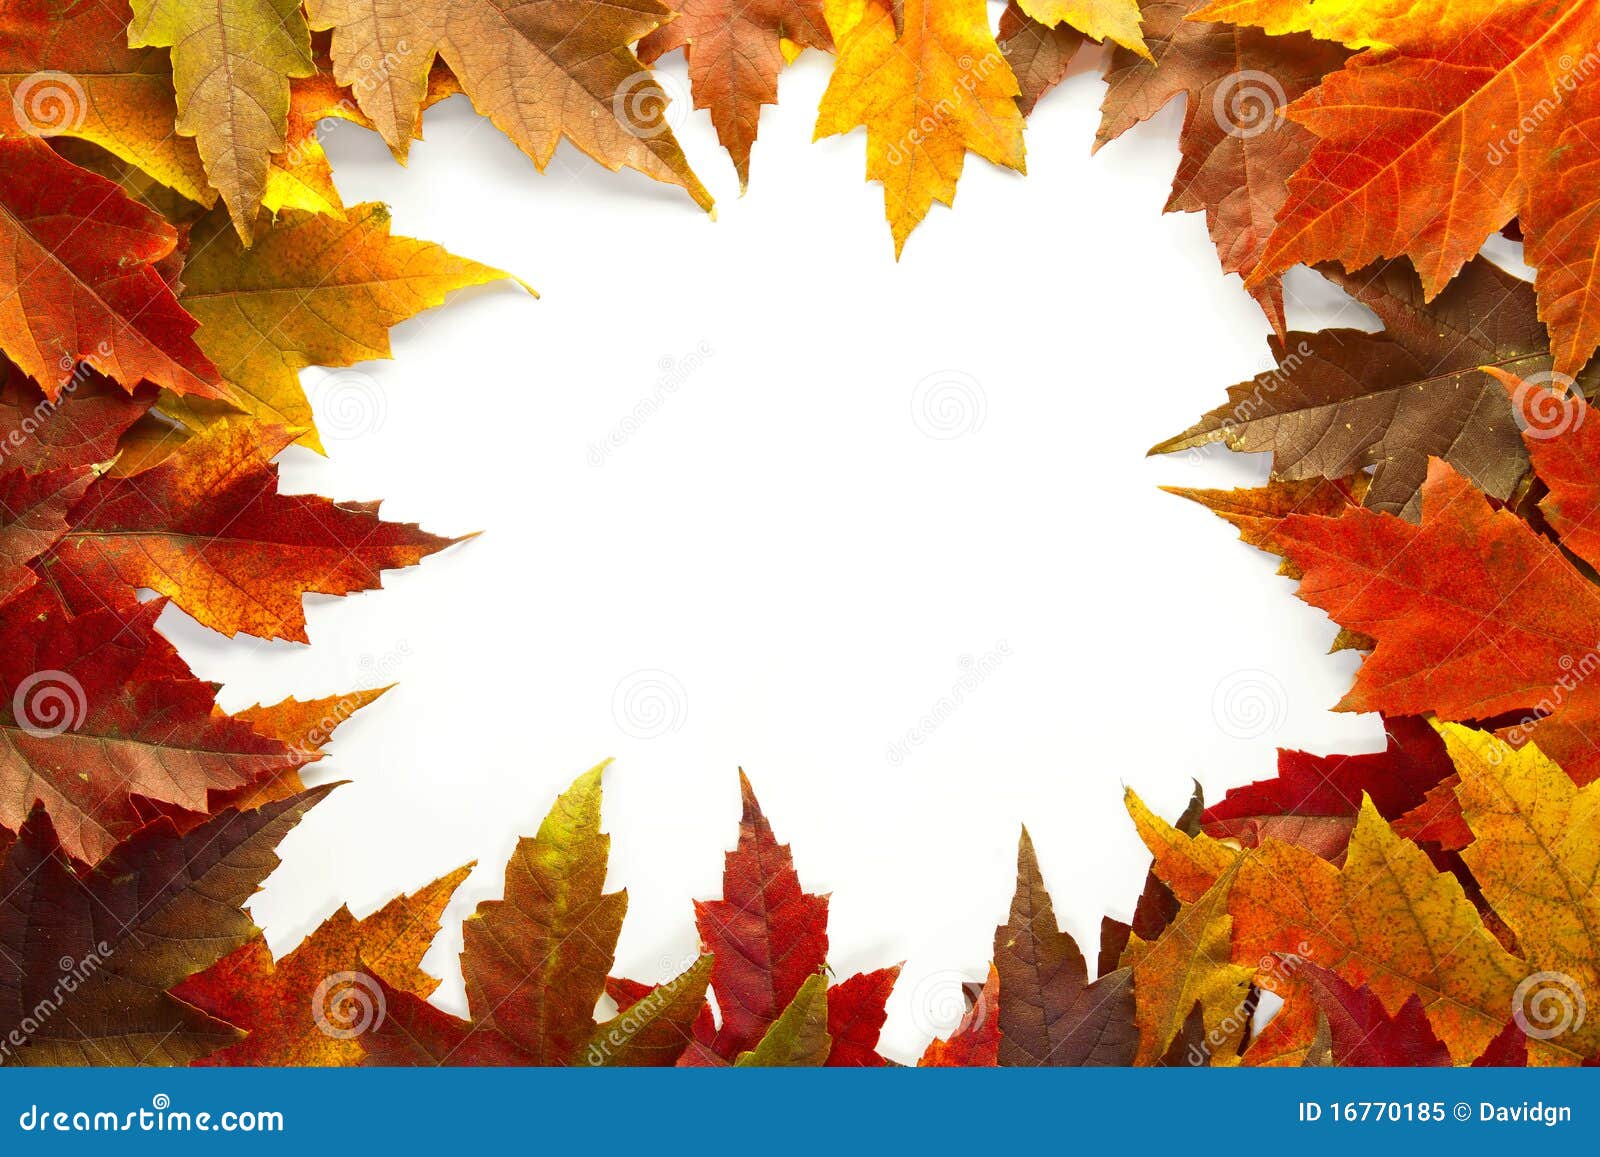 maple leaves mixed fall colors border 2